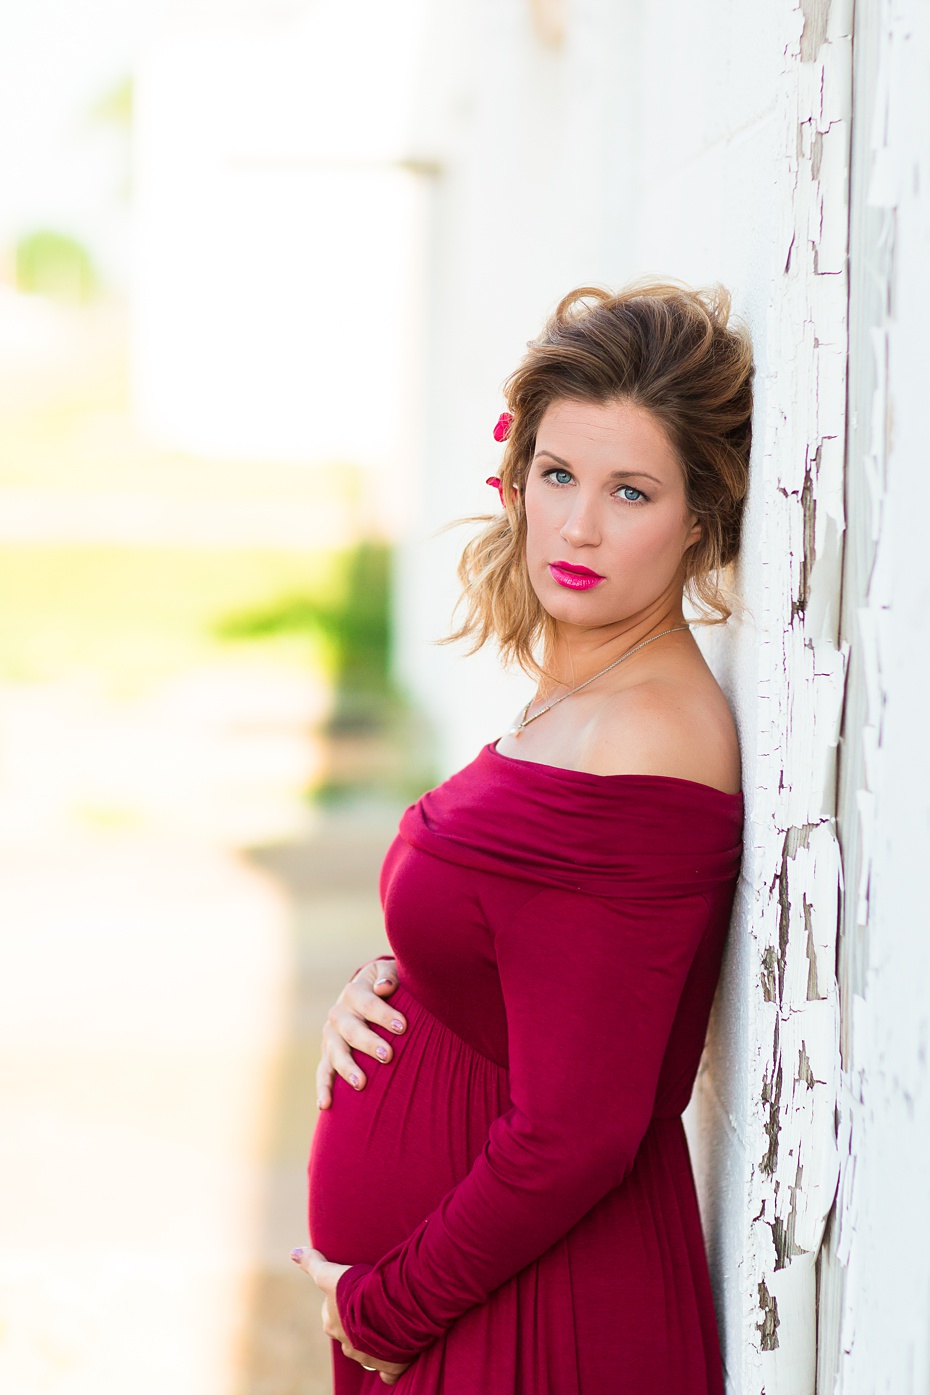 truly_you_photography_enid__photographer_family_maternity-25_web.jpg